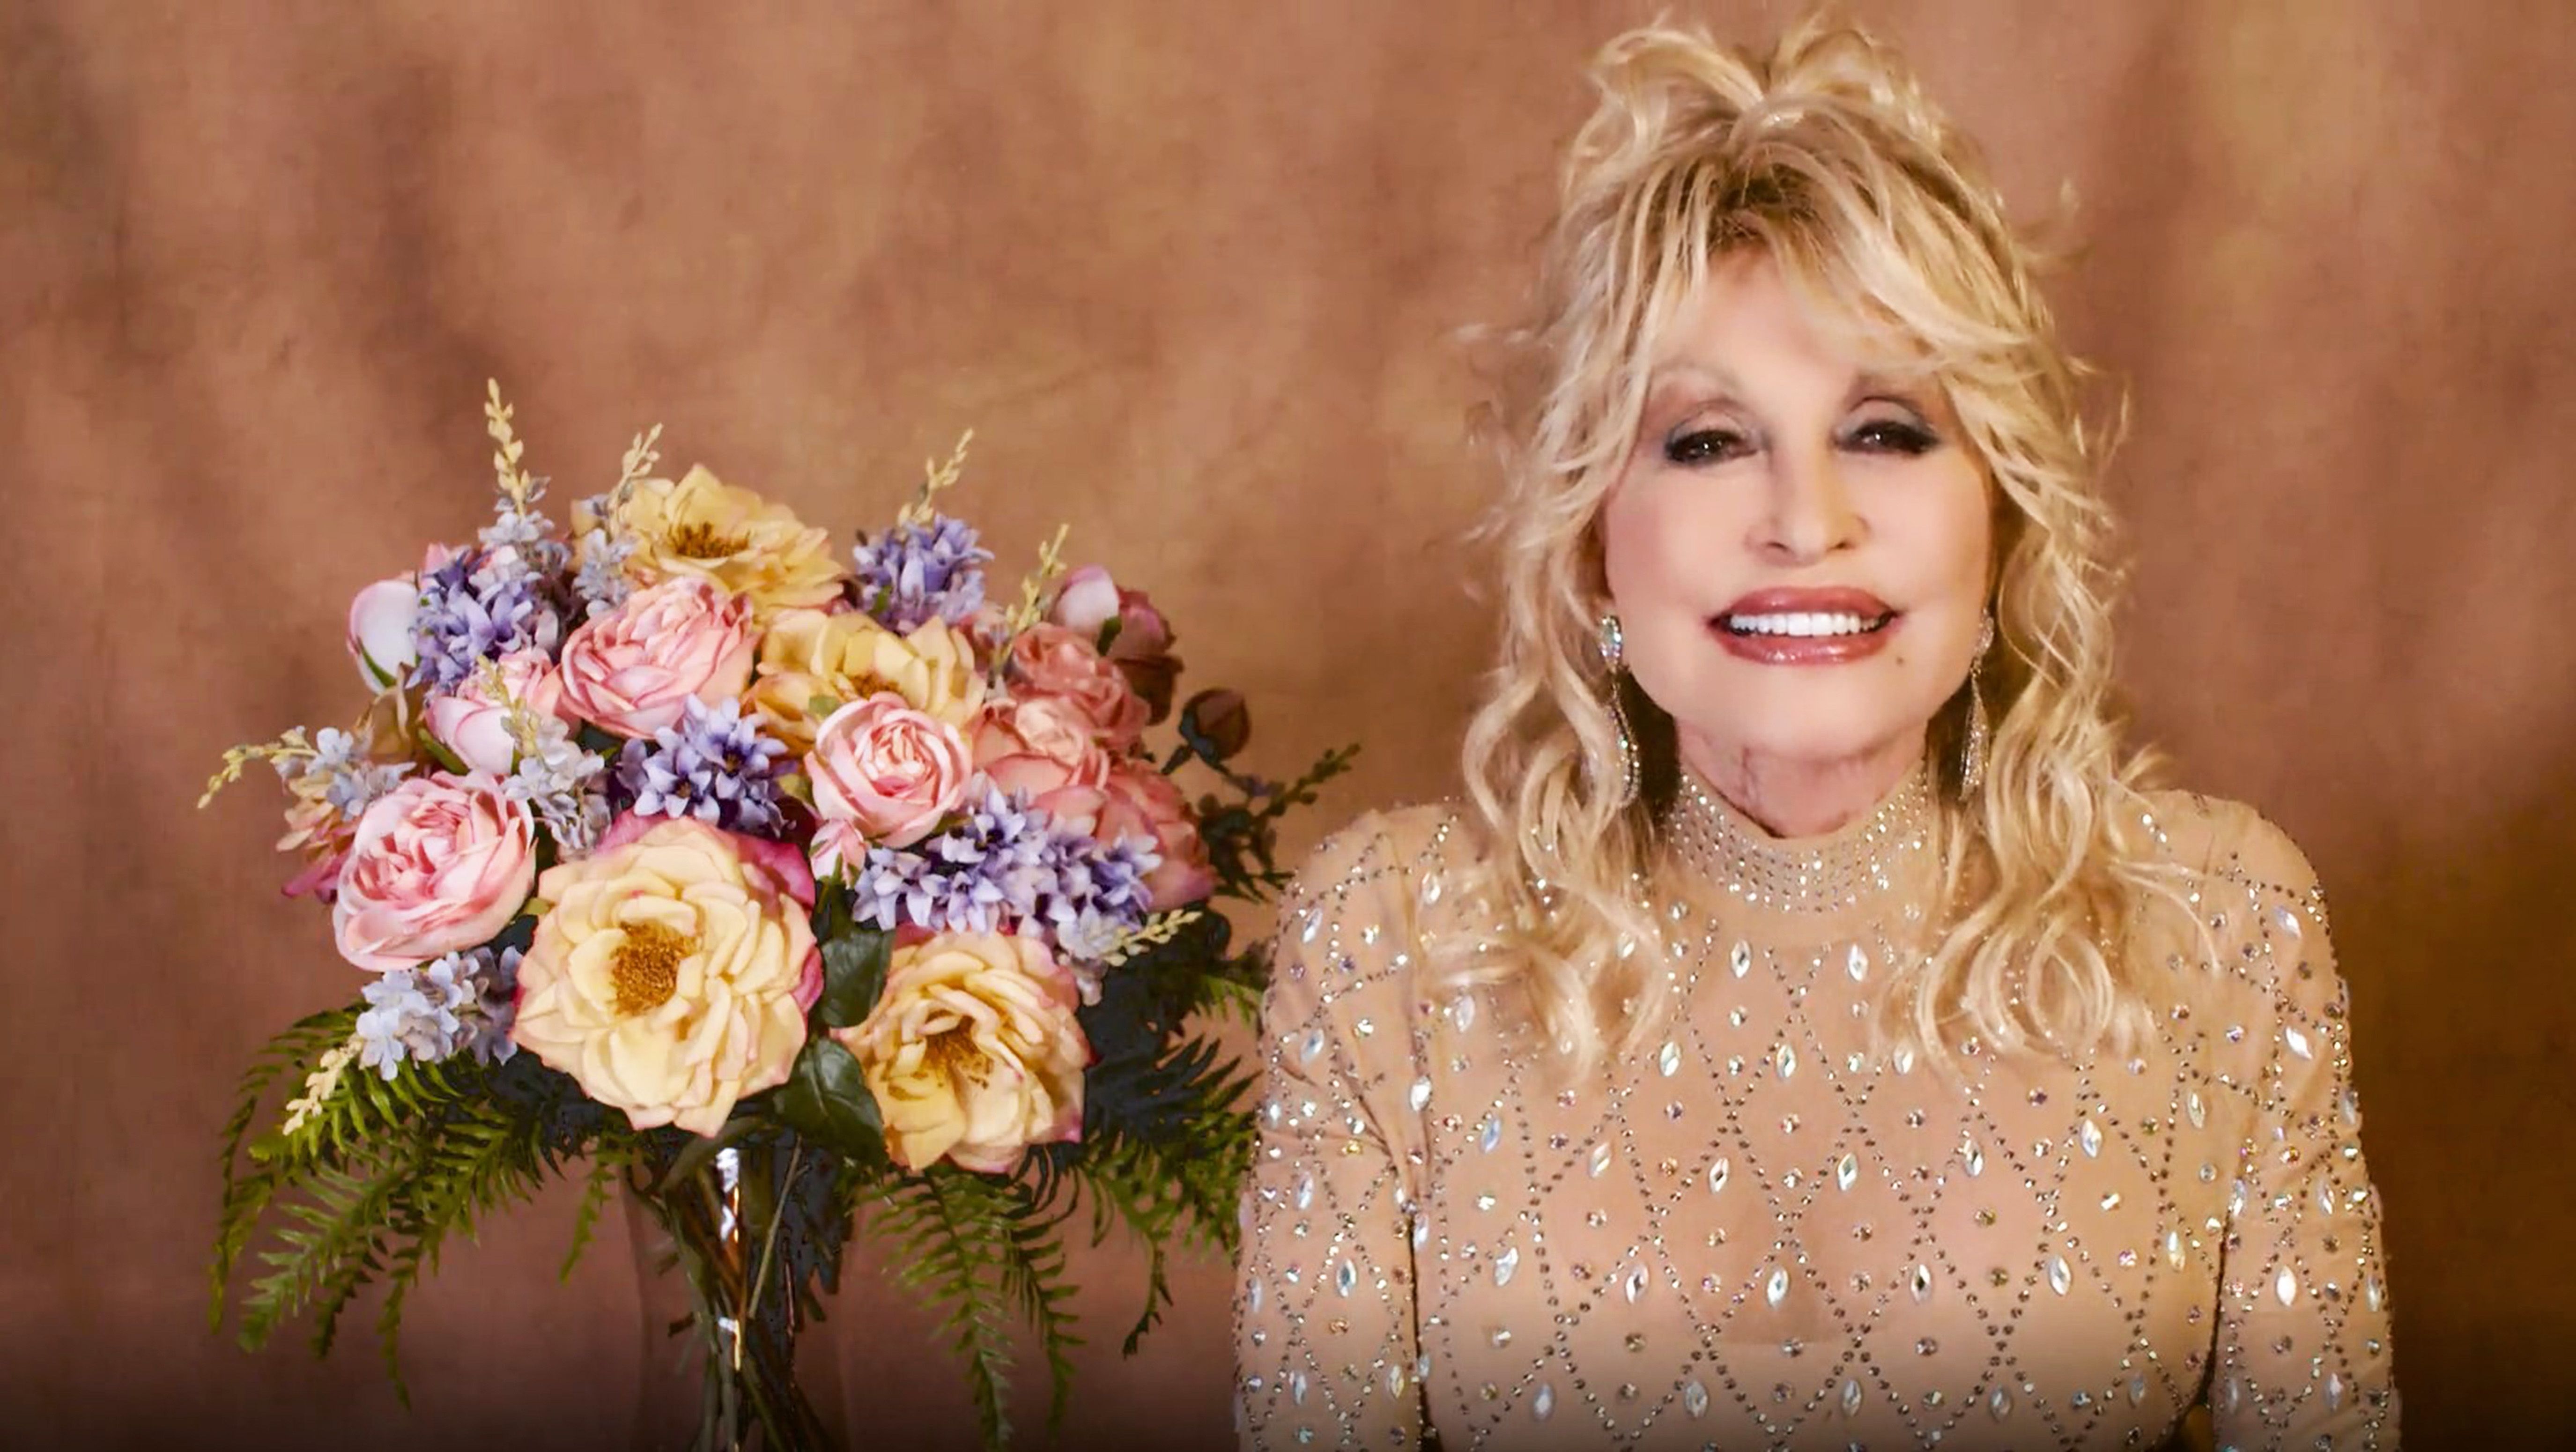 Dolly Parton sits in front of a bouquet of roses